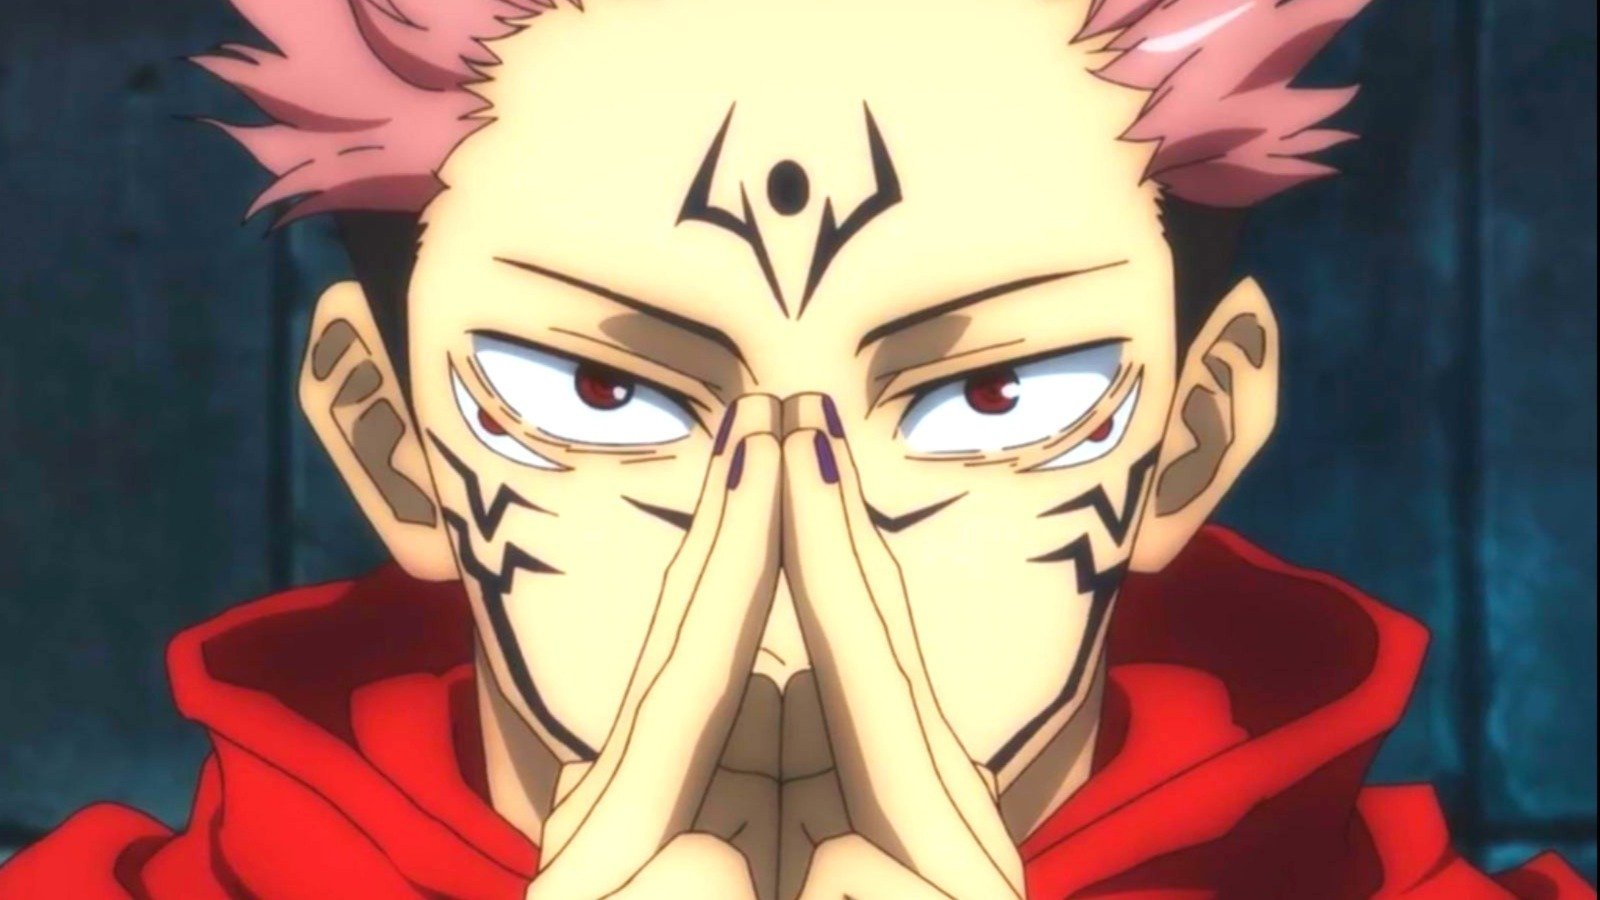 Jujutsu Kaisen Chapter 149 Release Date, Time, Where to Watch